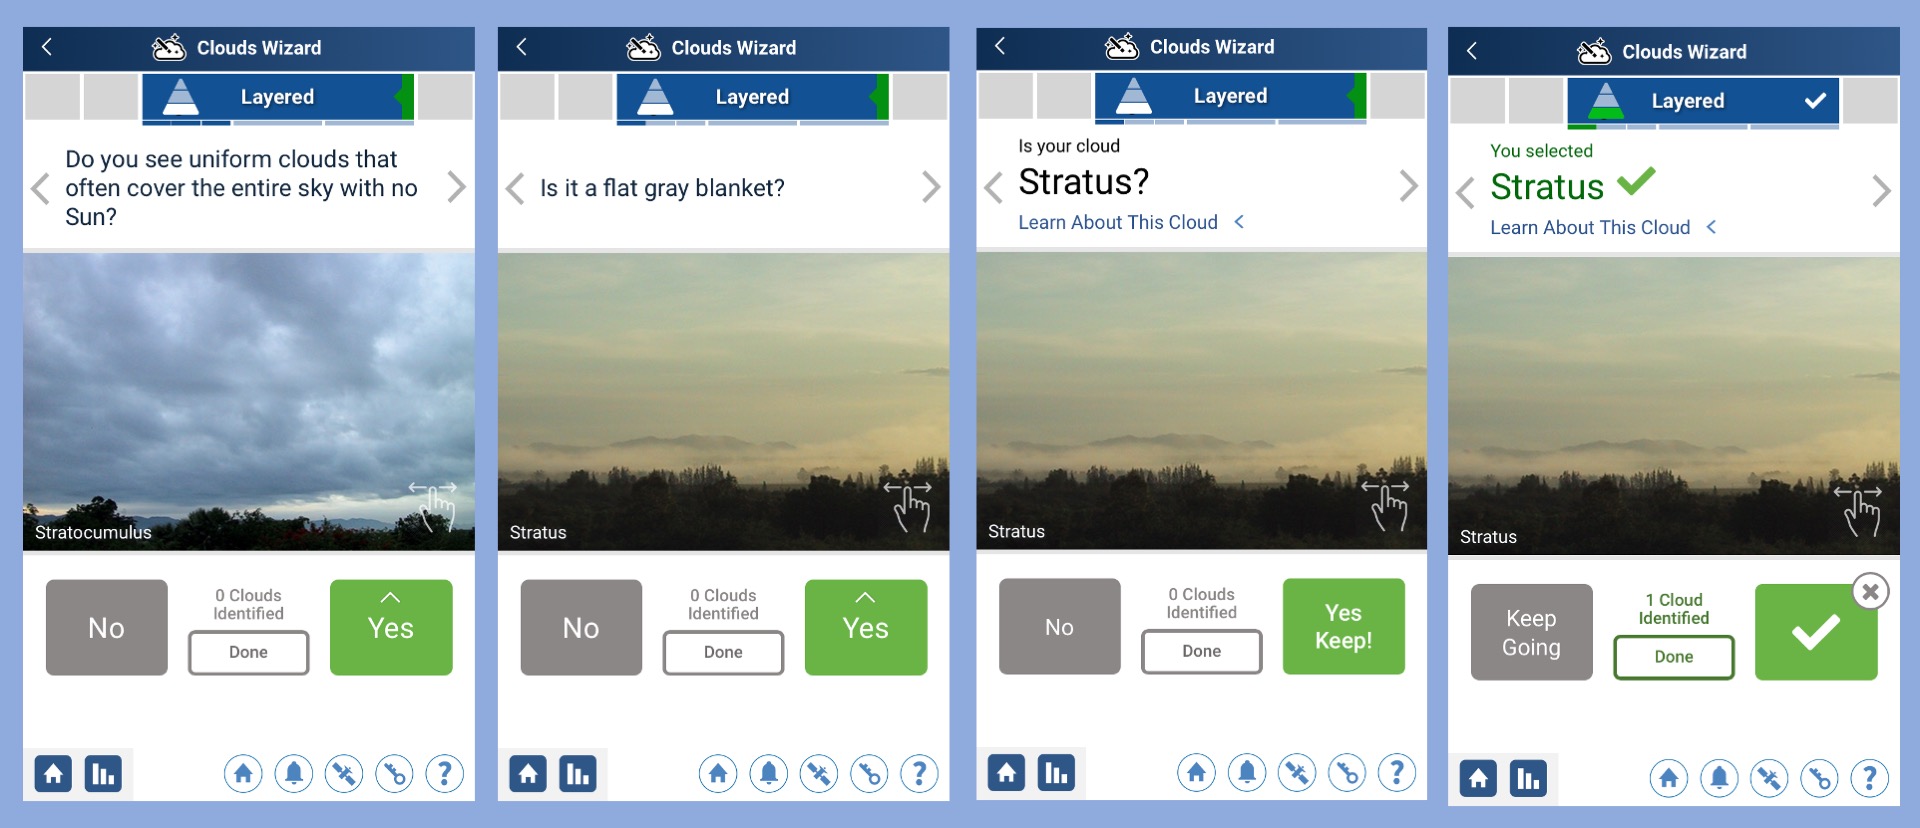 Screenshots showing the selection of a stratus cloud